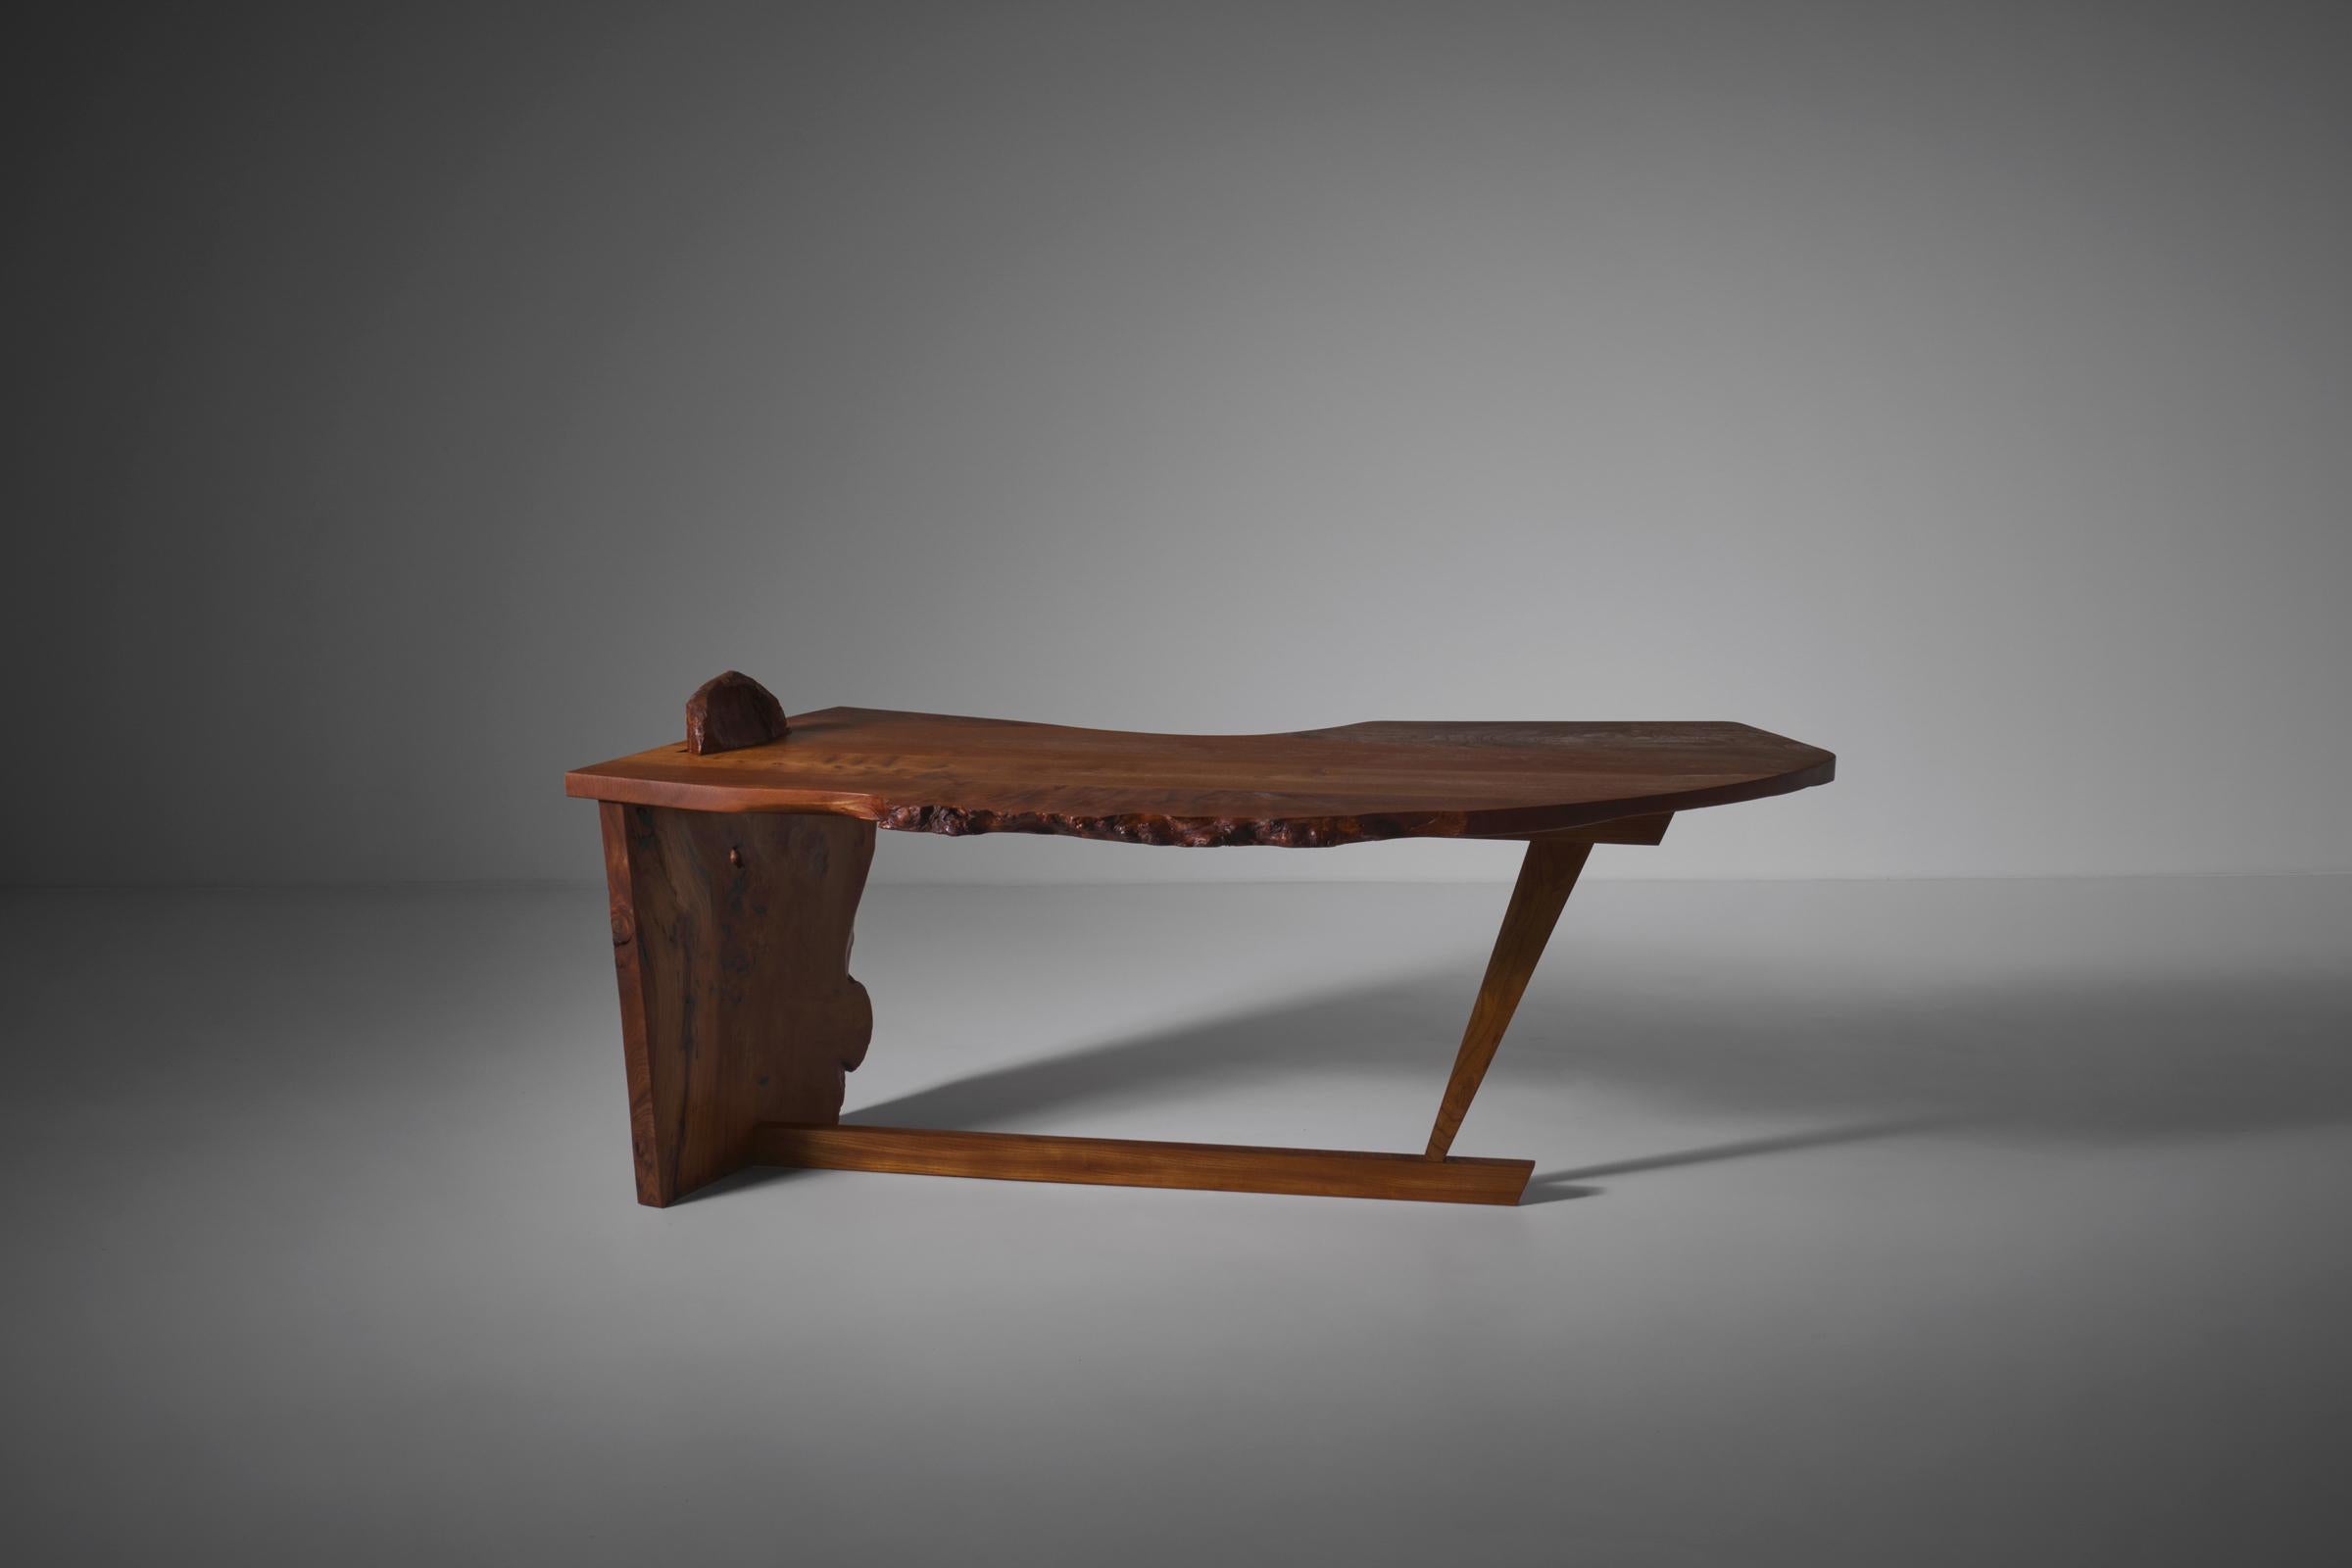 Exceptional free form shaped desk, France 1970s. Made from beautiful French Elm wood with an incredible wood grain and a nice deep warm color. The top is composed of three slabs in an interesting free form, with characteristic living edges. The main